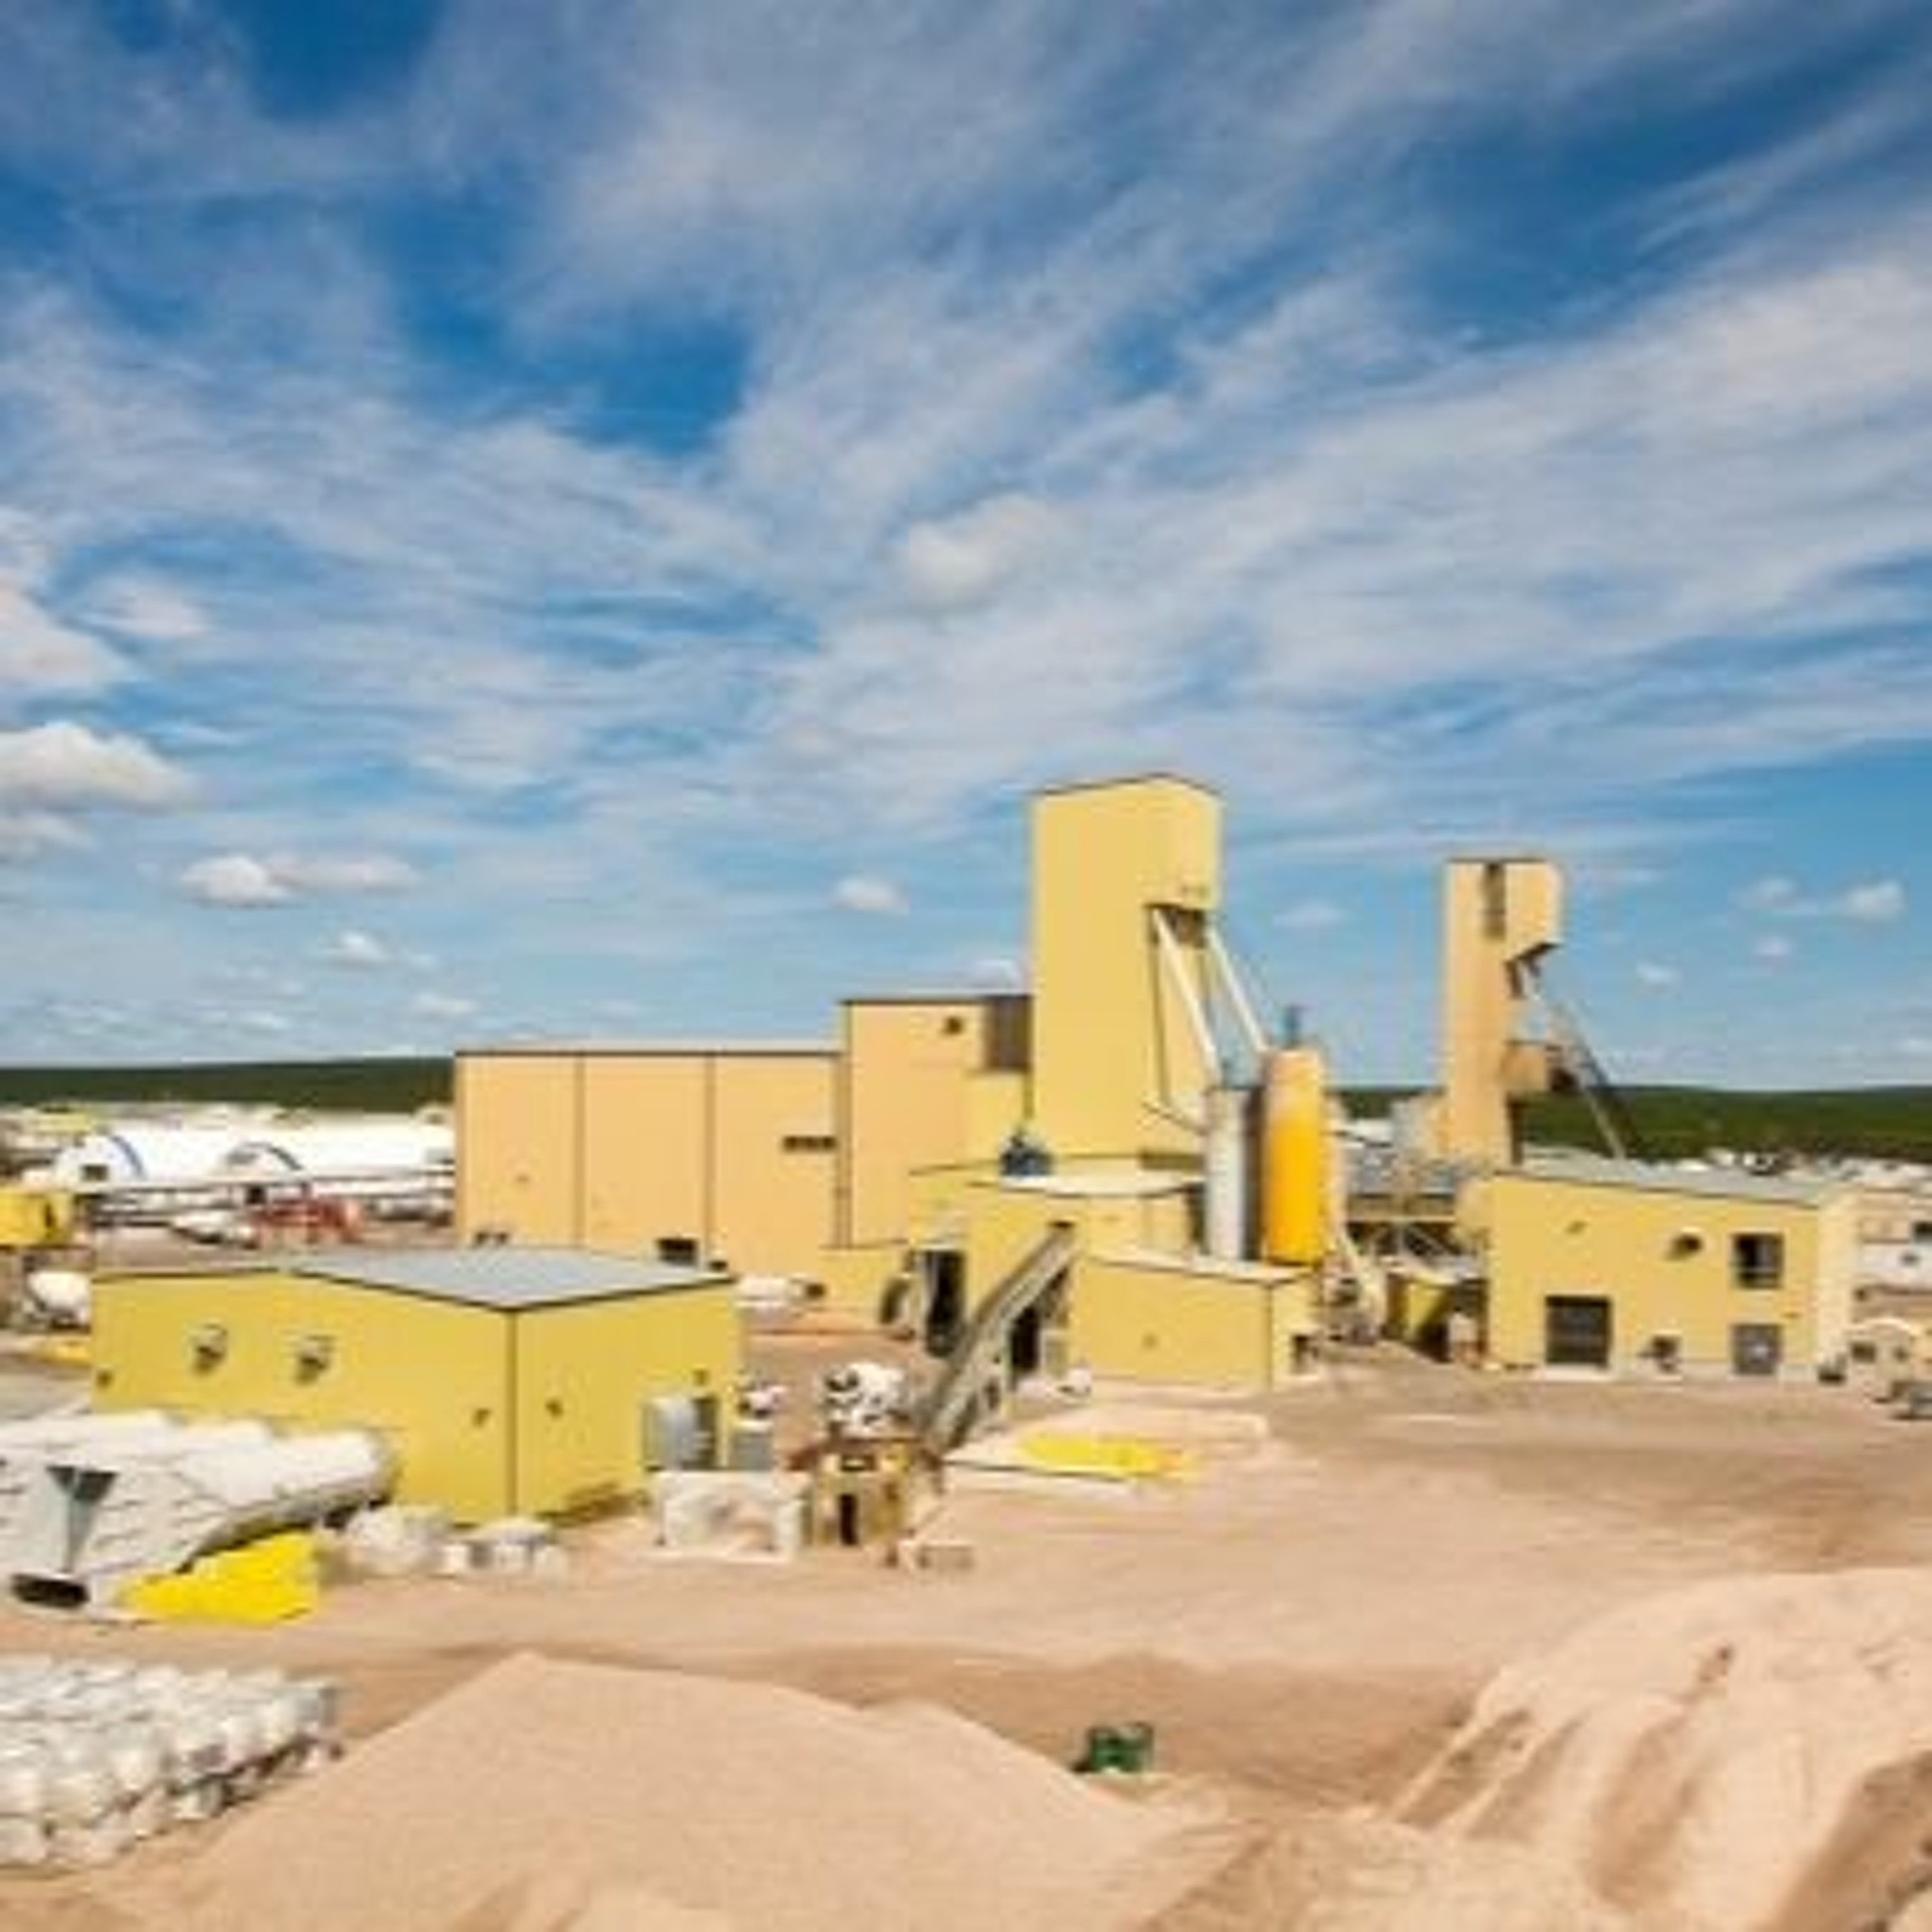 Episode 240: Cameco sees supply 'uncertainty' as world transitions to net zero carbon economy